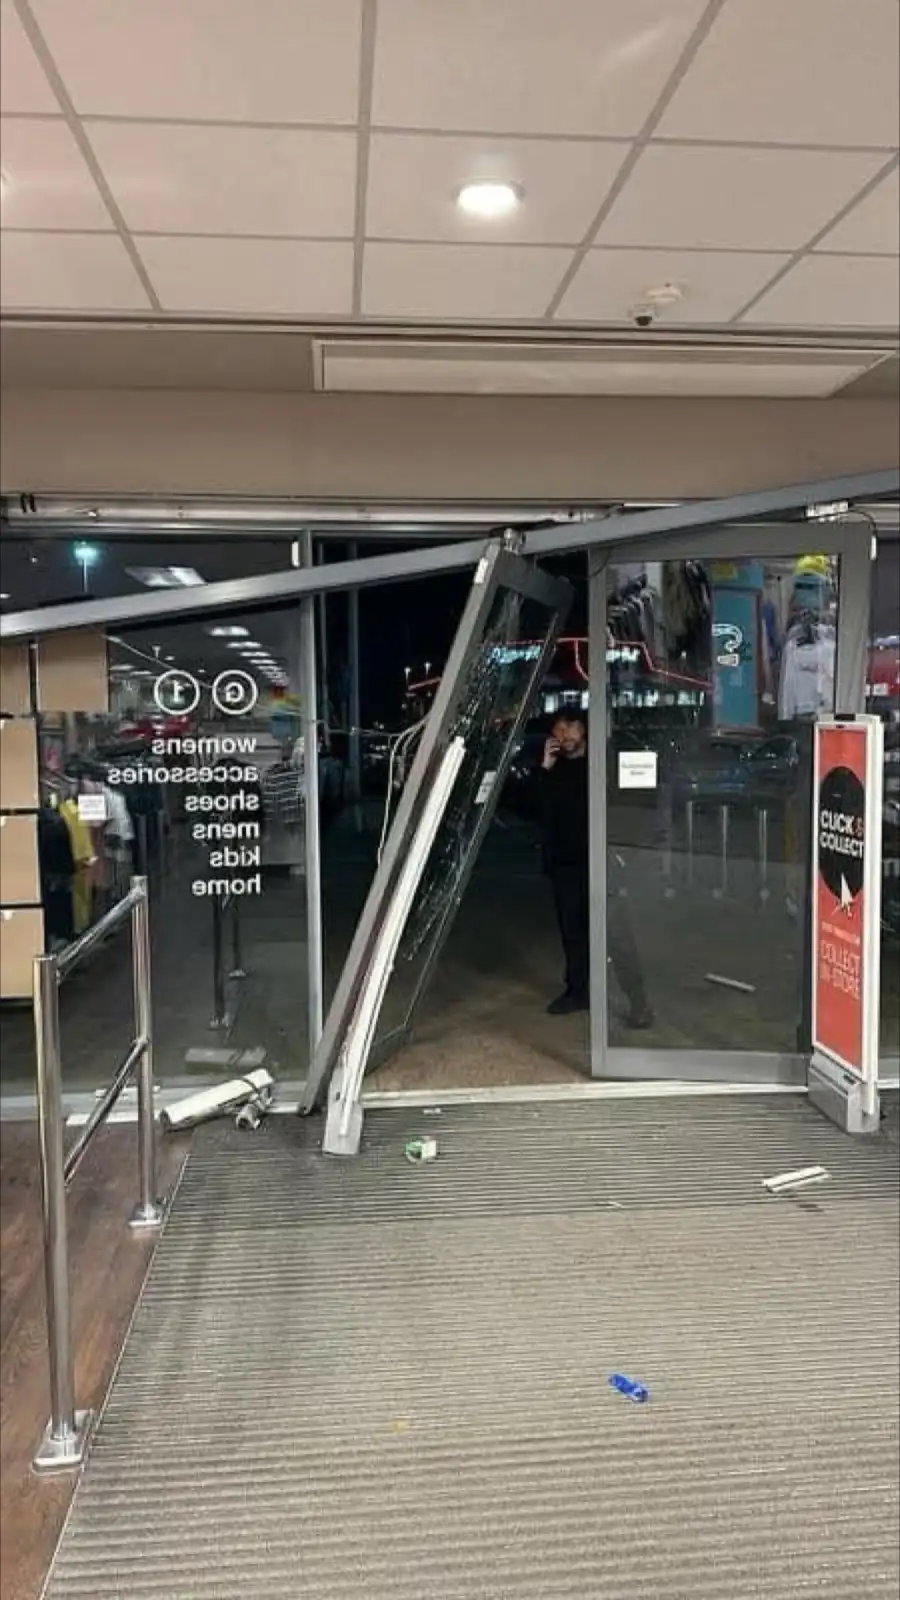 A damaged shop front entrance in Hull